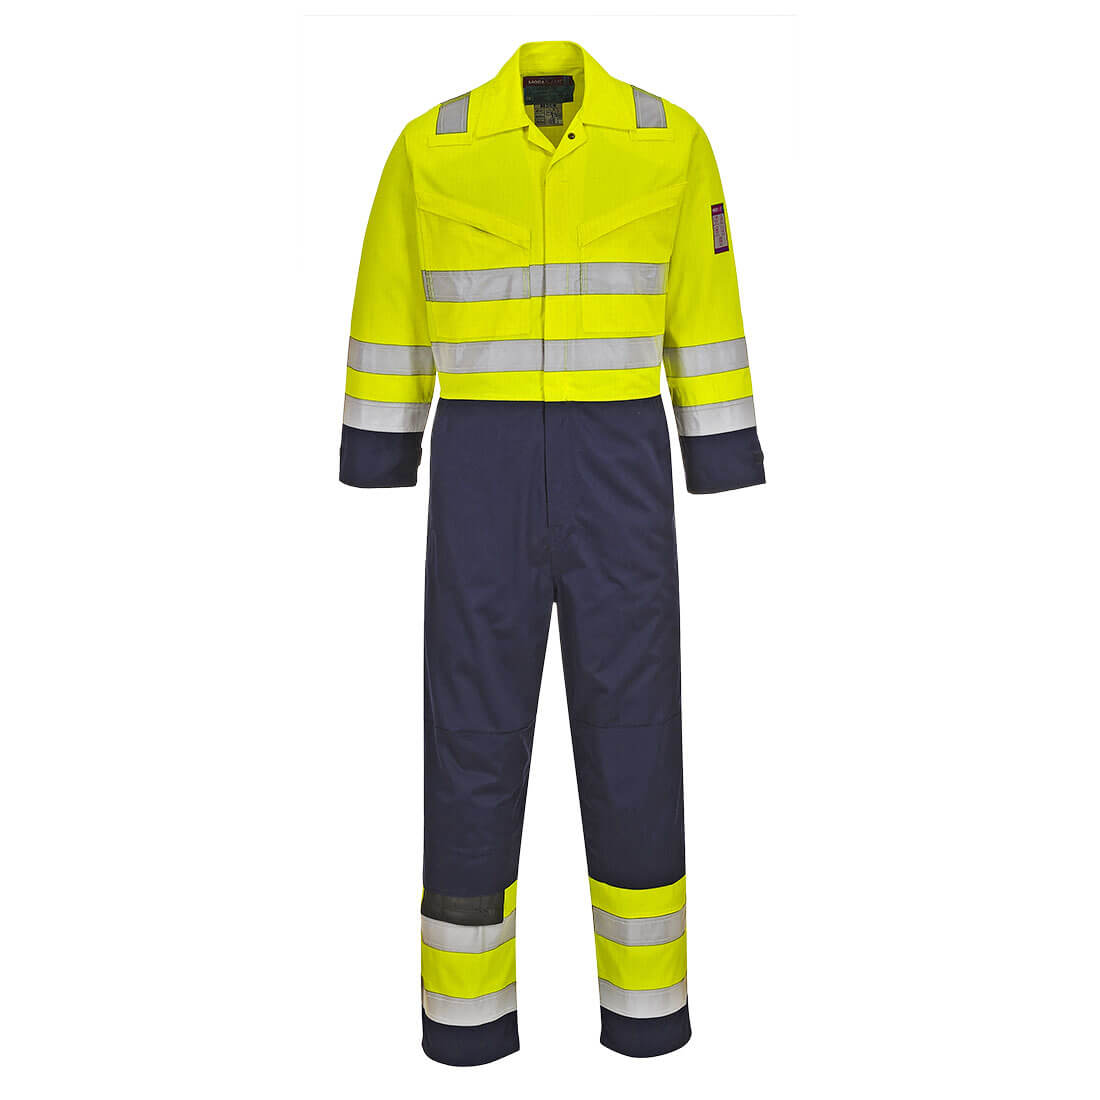 Image of Modaflame Flame Resistant Hi Vis Overall Yellow / Navy 2XL 32"